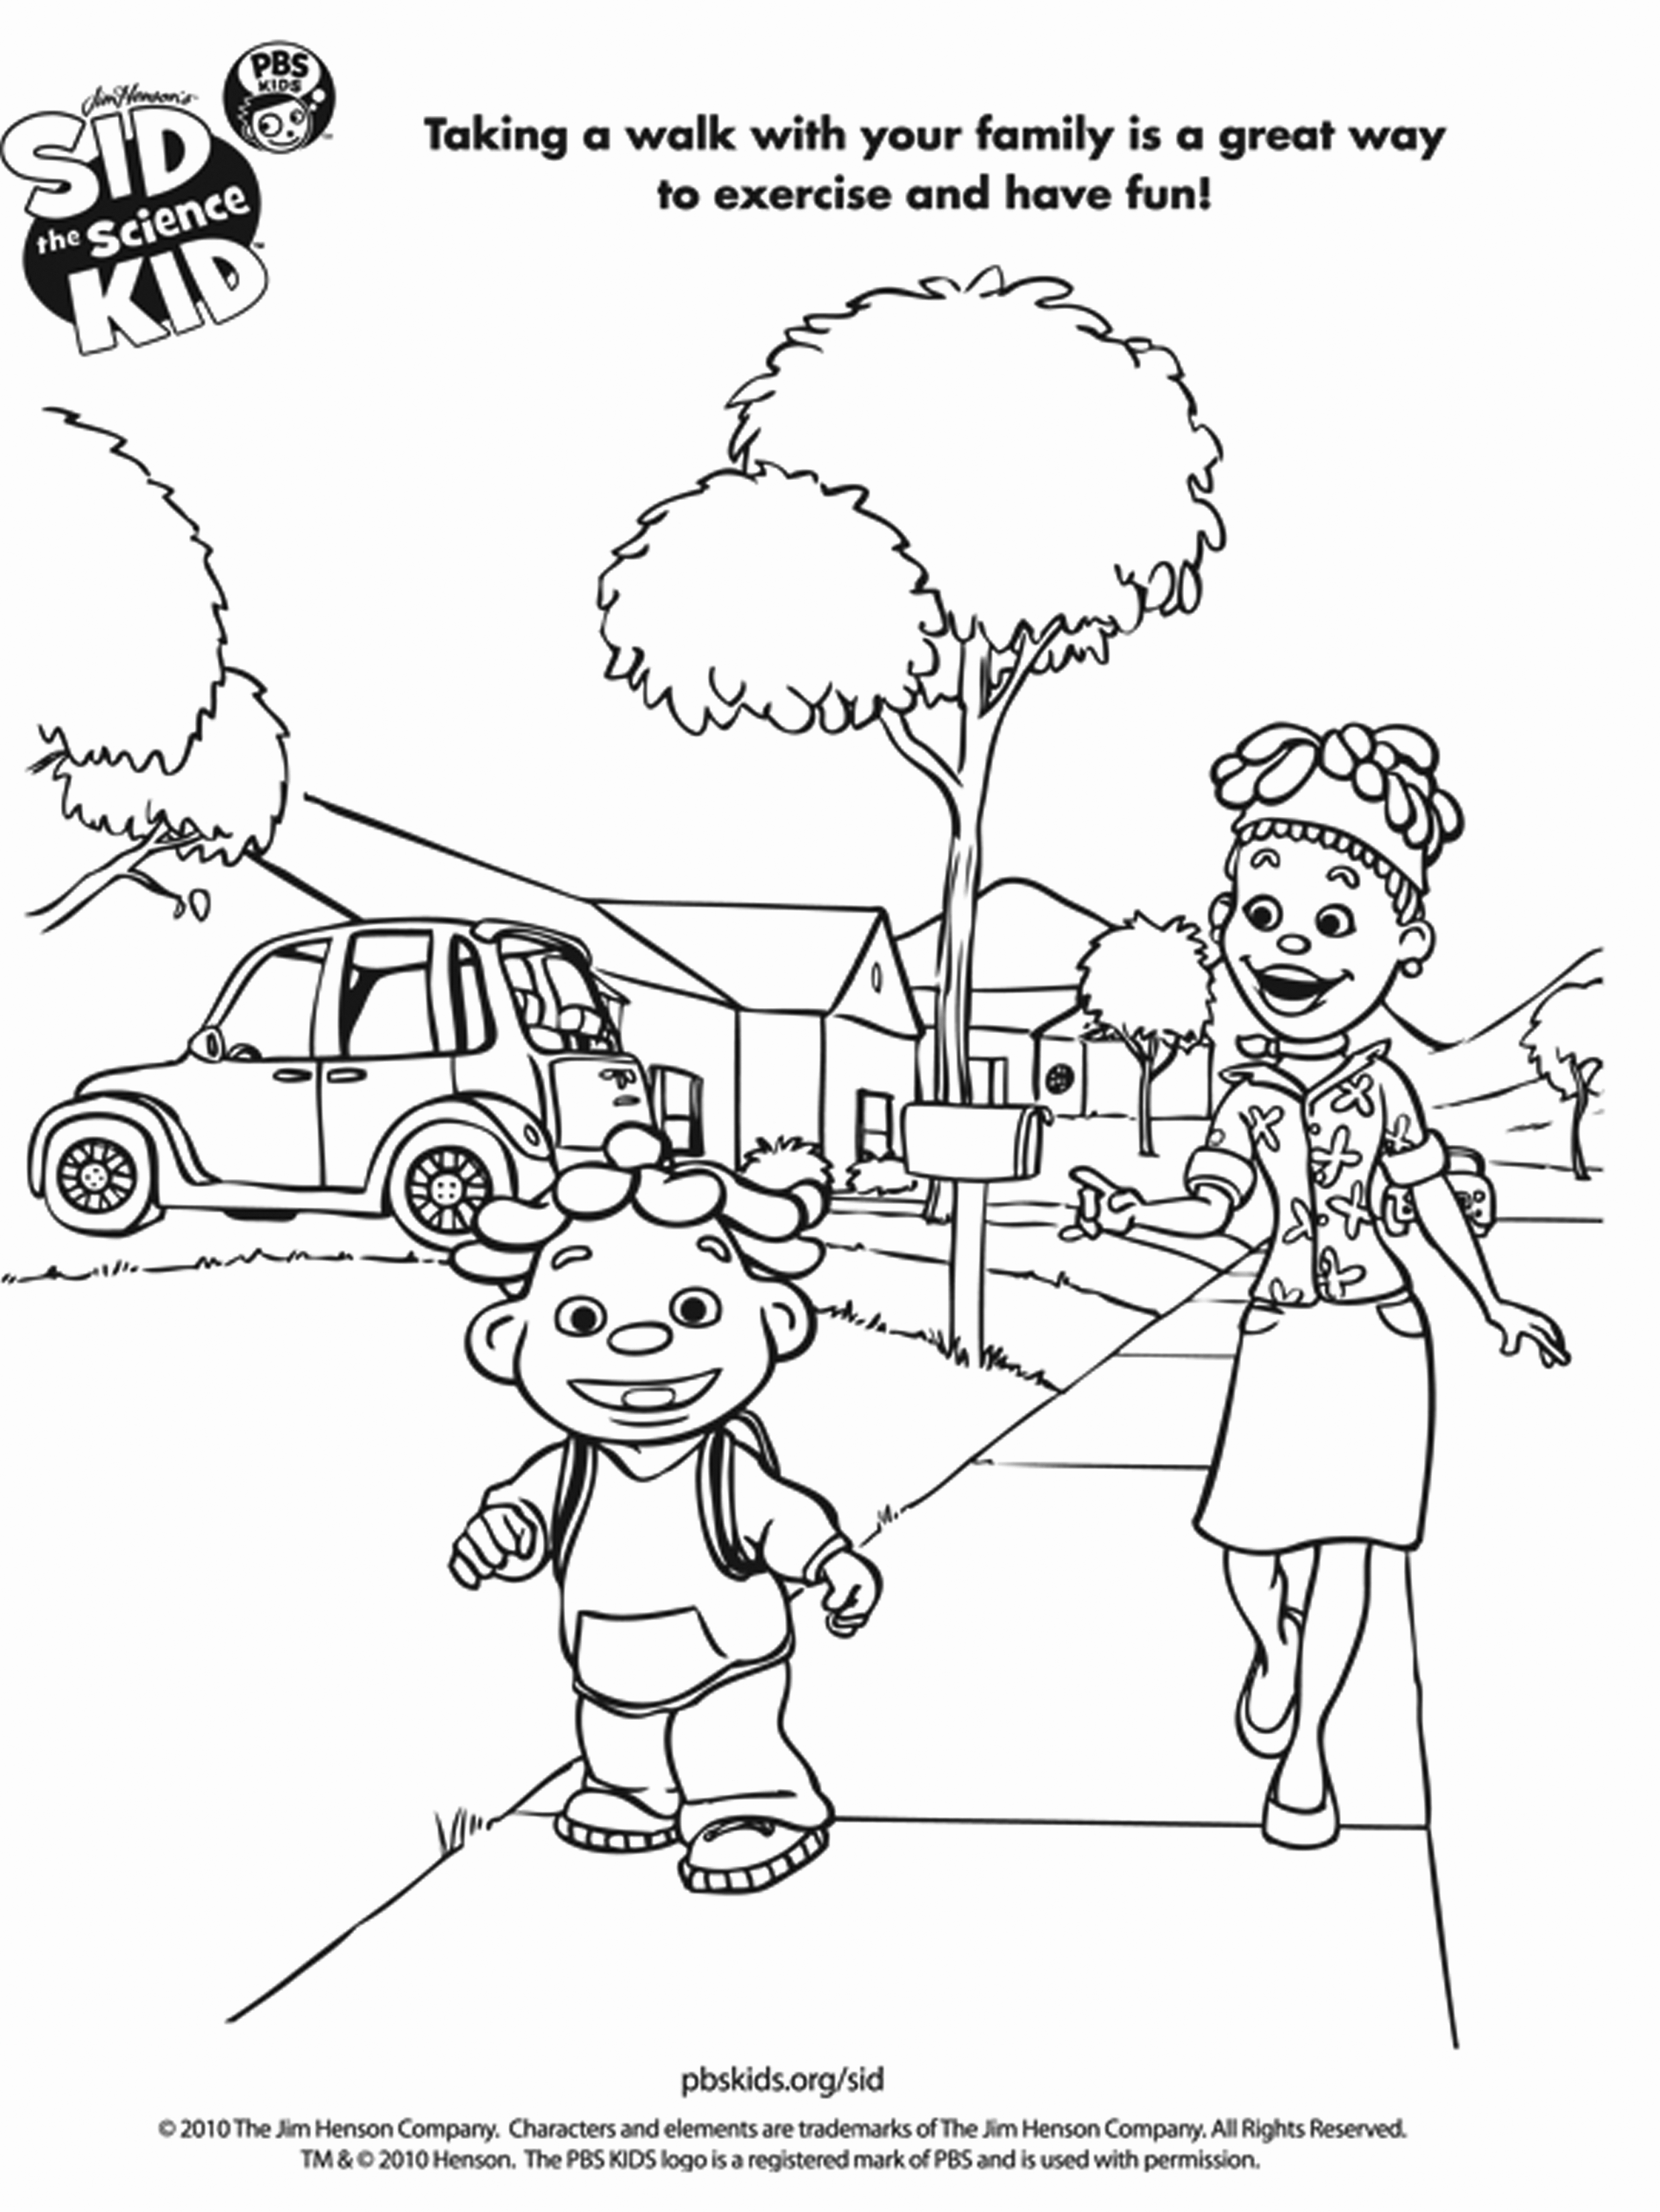 Sid The Science Kid Exercise Coloring Pages